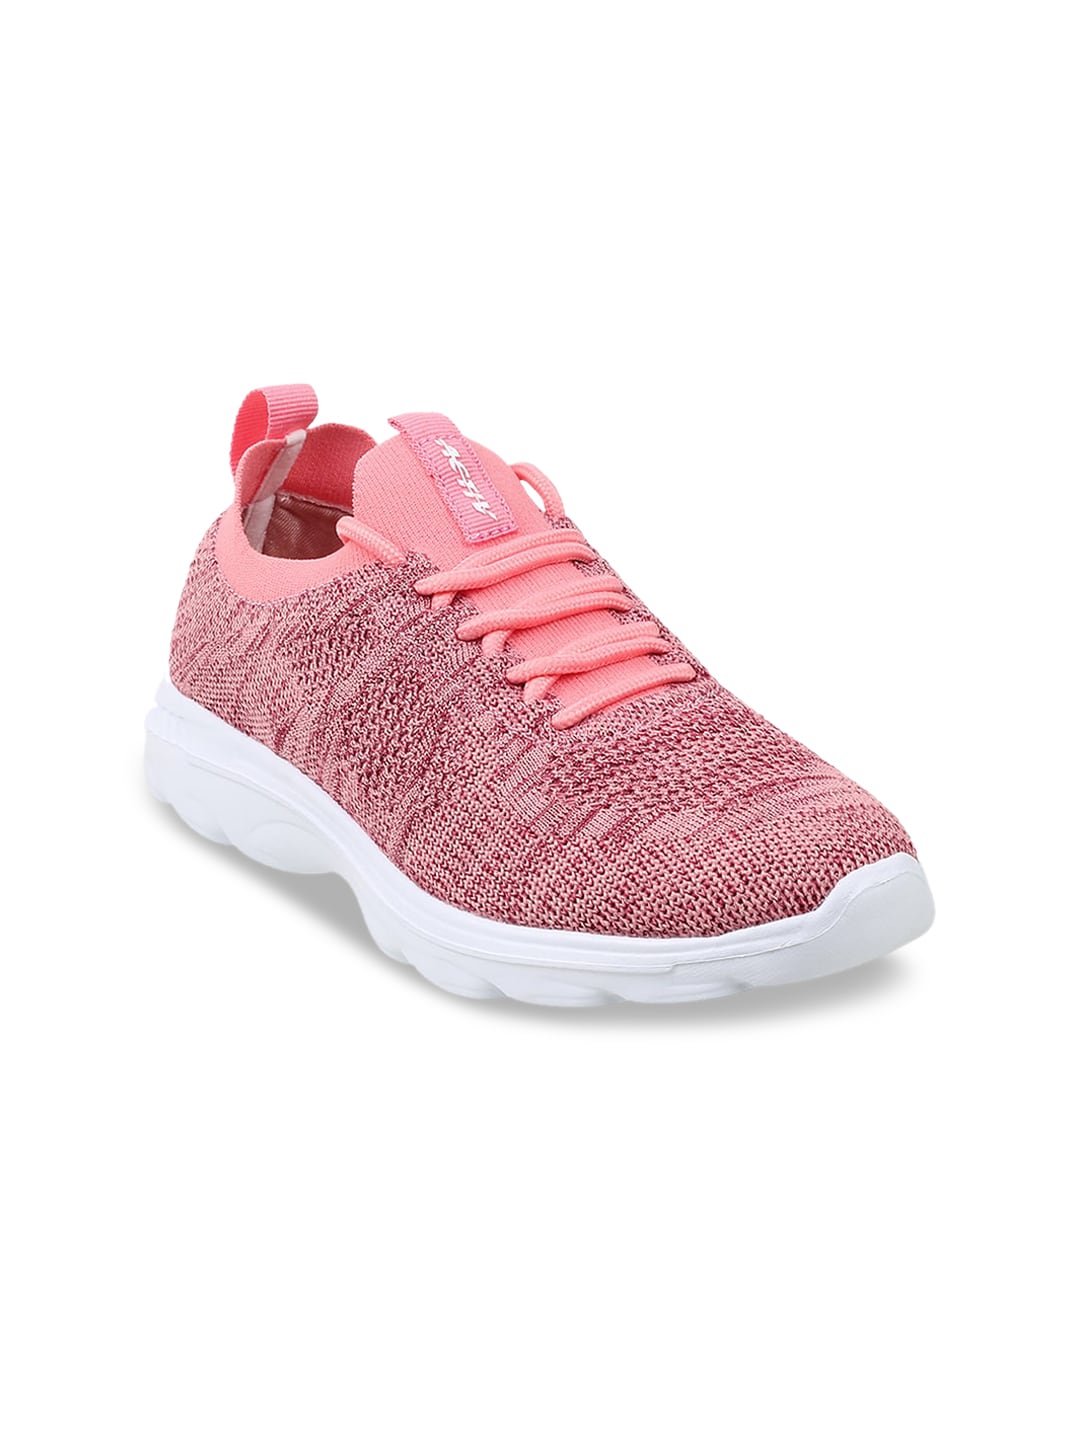 ACTIV Women Pink Woven Design Everyday Sneakers Price in India